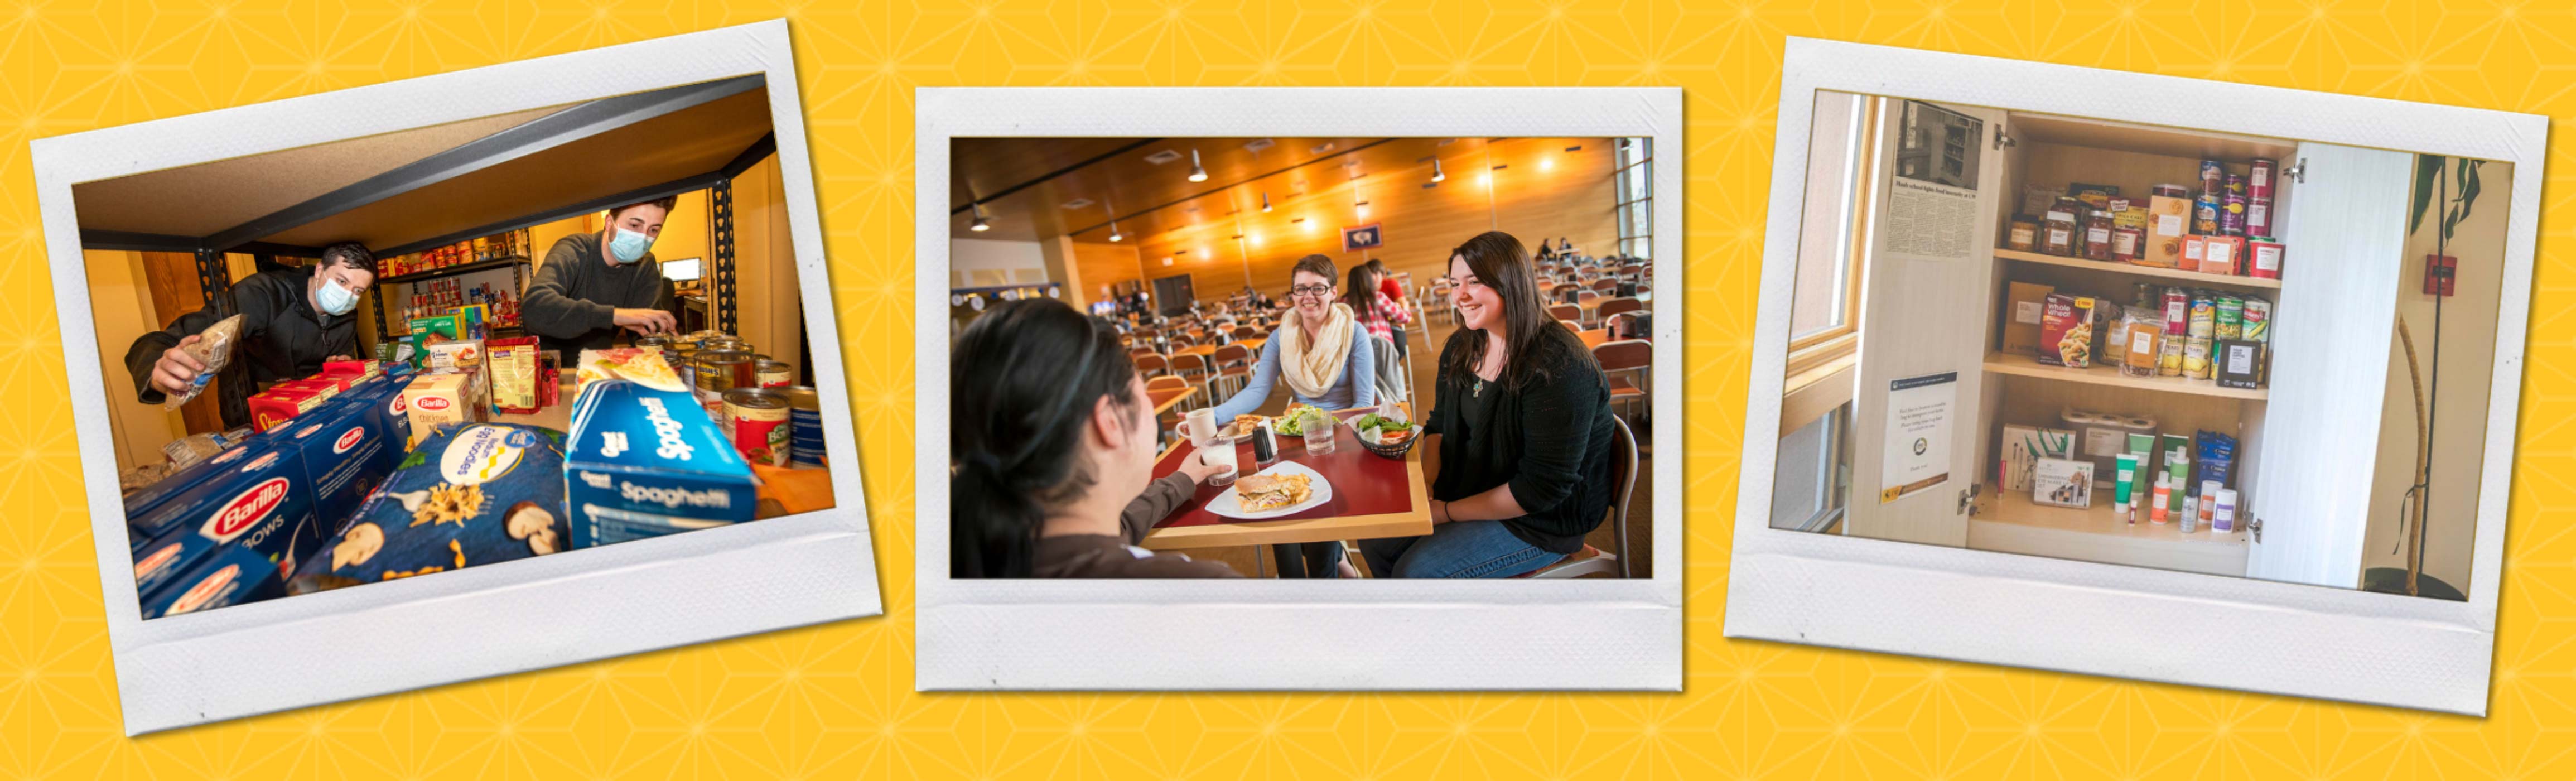 UW Gold background; three photos in Polaroid frames; left: UW Food Share Pantry coordinator and volunteer organizing pasta; center: three women eating in Washakie Dining Center, right: food share cabinet with canned goods and pasta